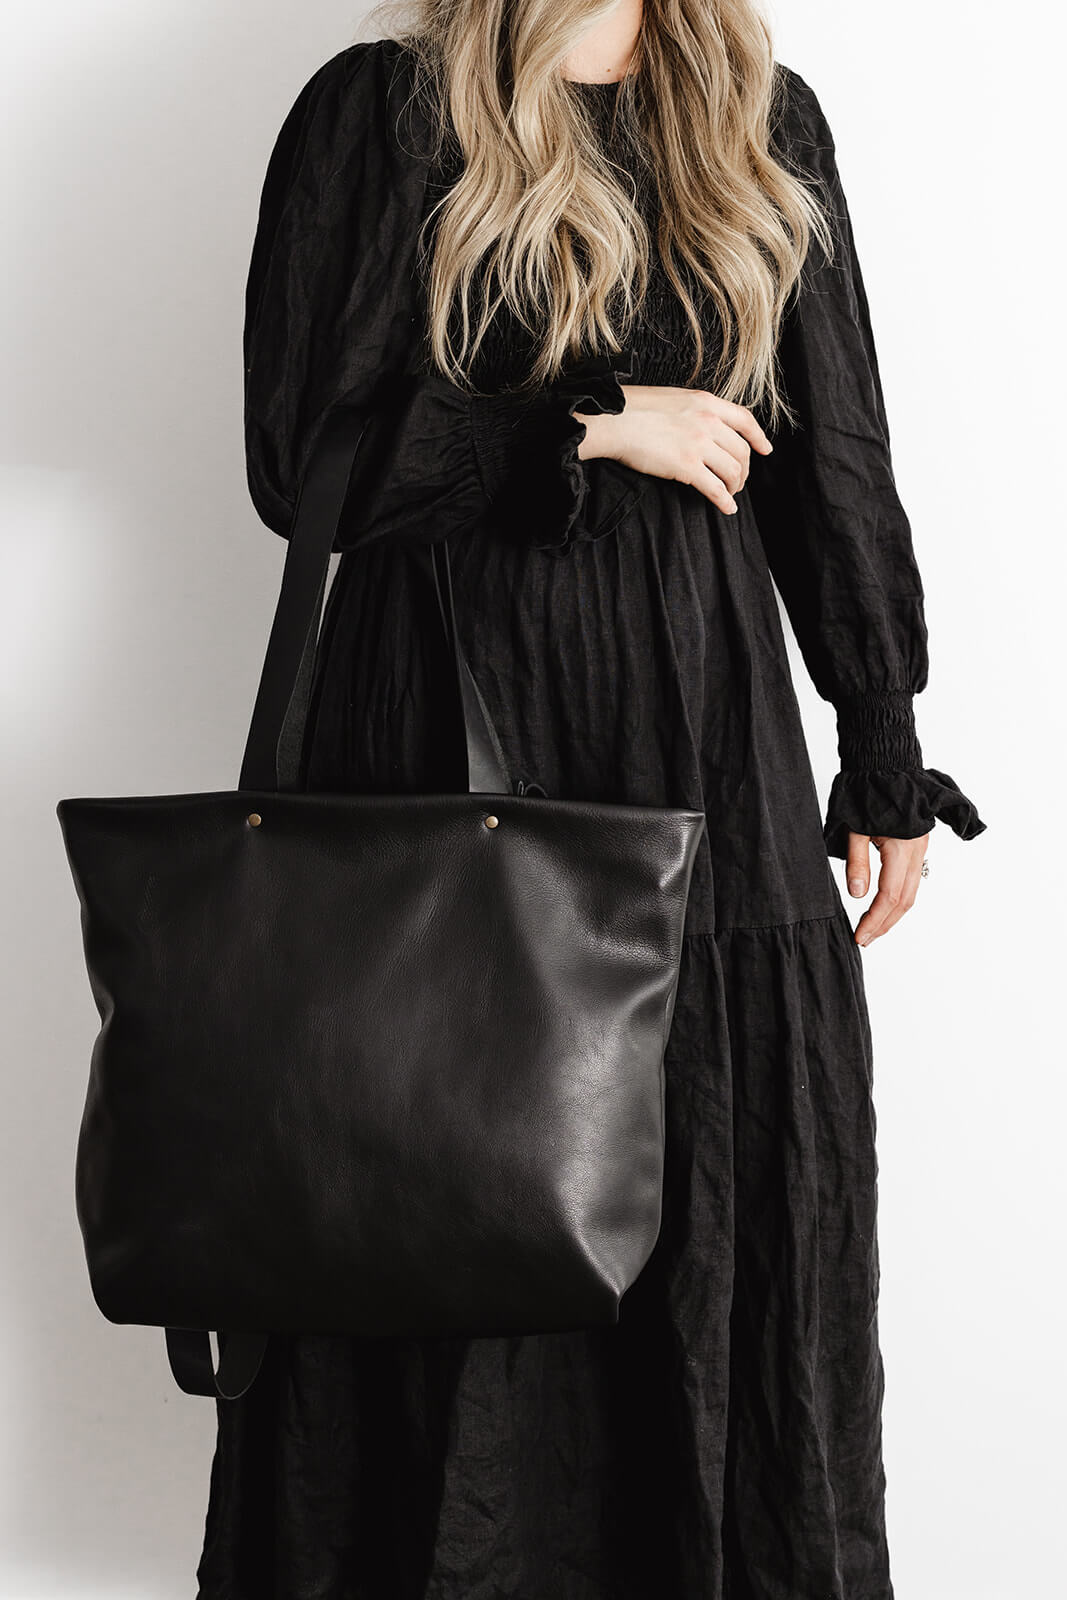 Woman with long flowing hair and wearing black dress modelling Ella Jackson Leather Backpack & Tote in Black as a tote on her arm. Photo does not show face